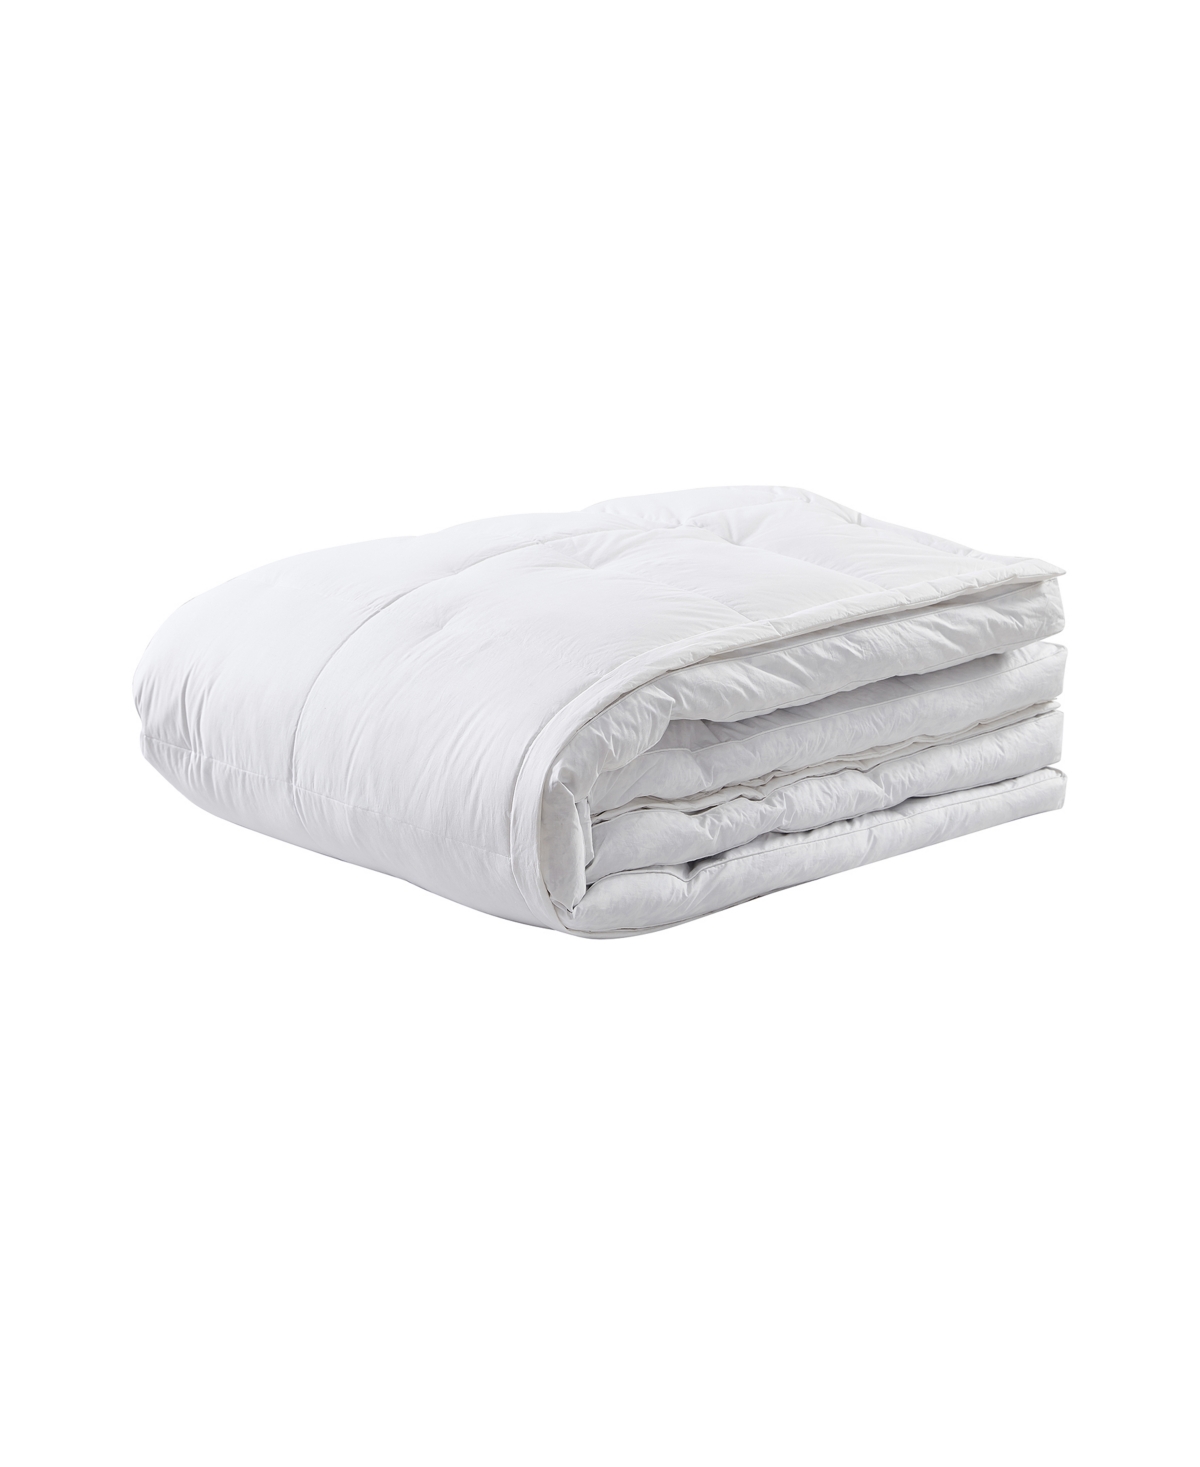 Serta Heiq Cooling 3" White Downtop Featherbeds, King